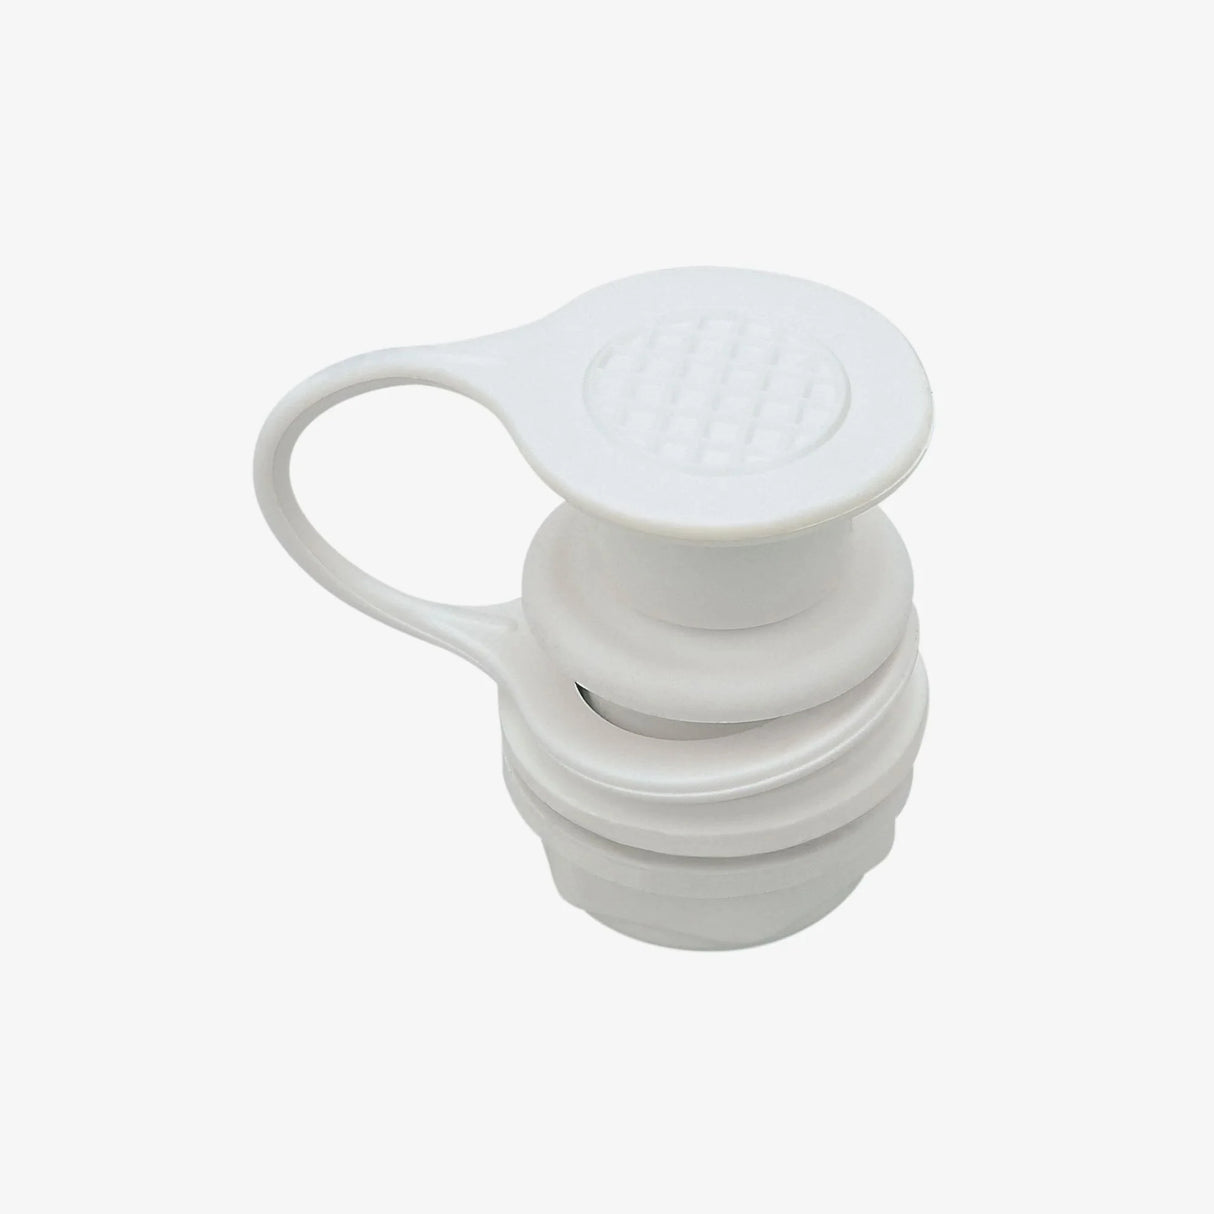 Igloo Triple-Snap Drain Plug Assembly With Plastic Tethered Cap